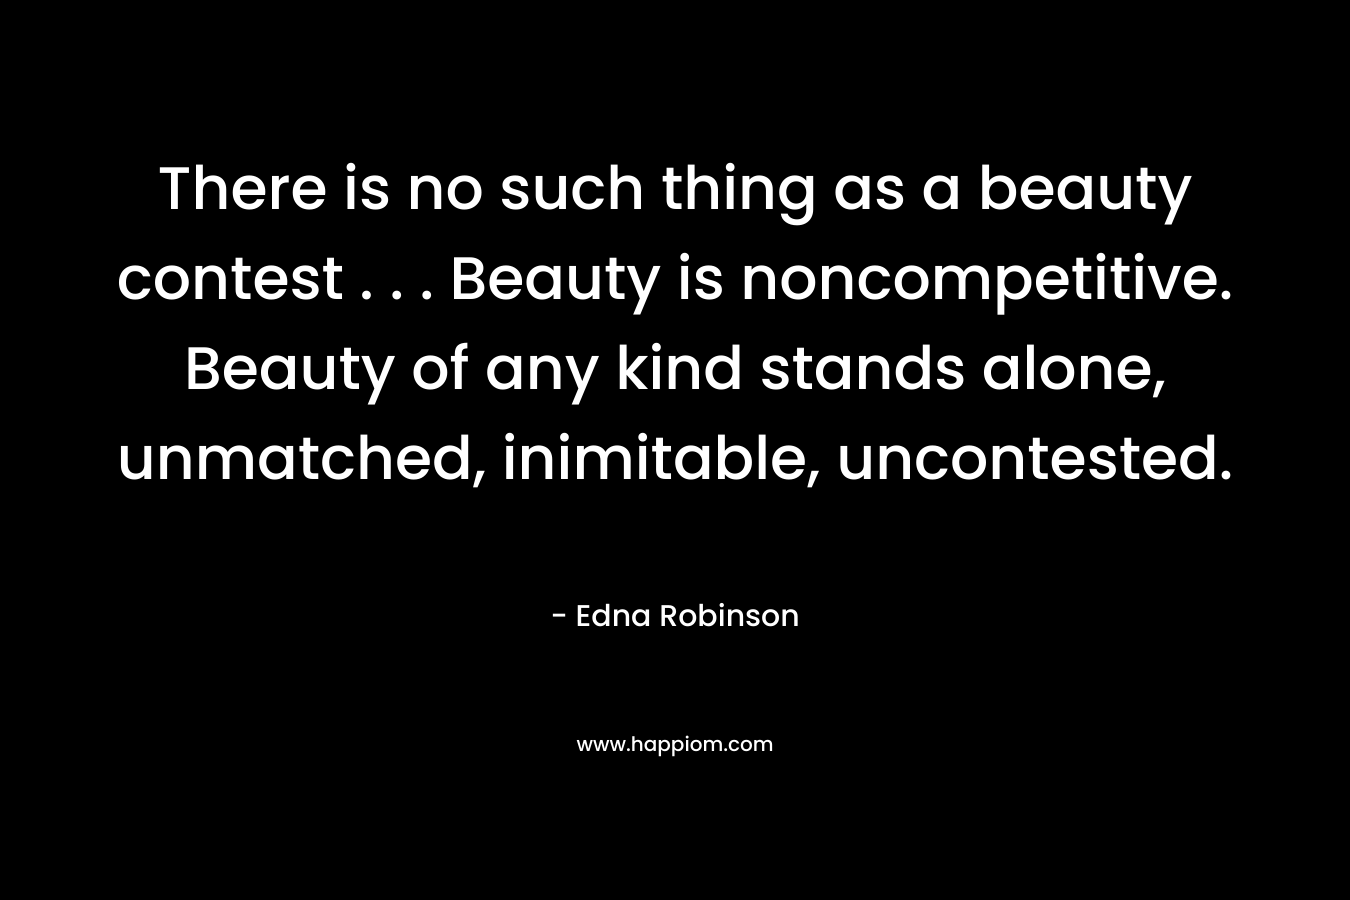 There is no such thing as a beauty contest . . . Beauty is noncompetitive. Beauty of any kind stands alone, unmatched, inimitable, uncontested.